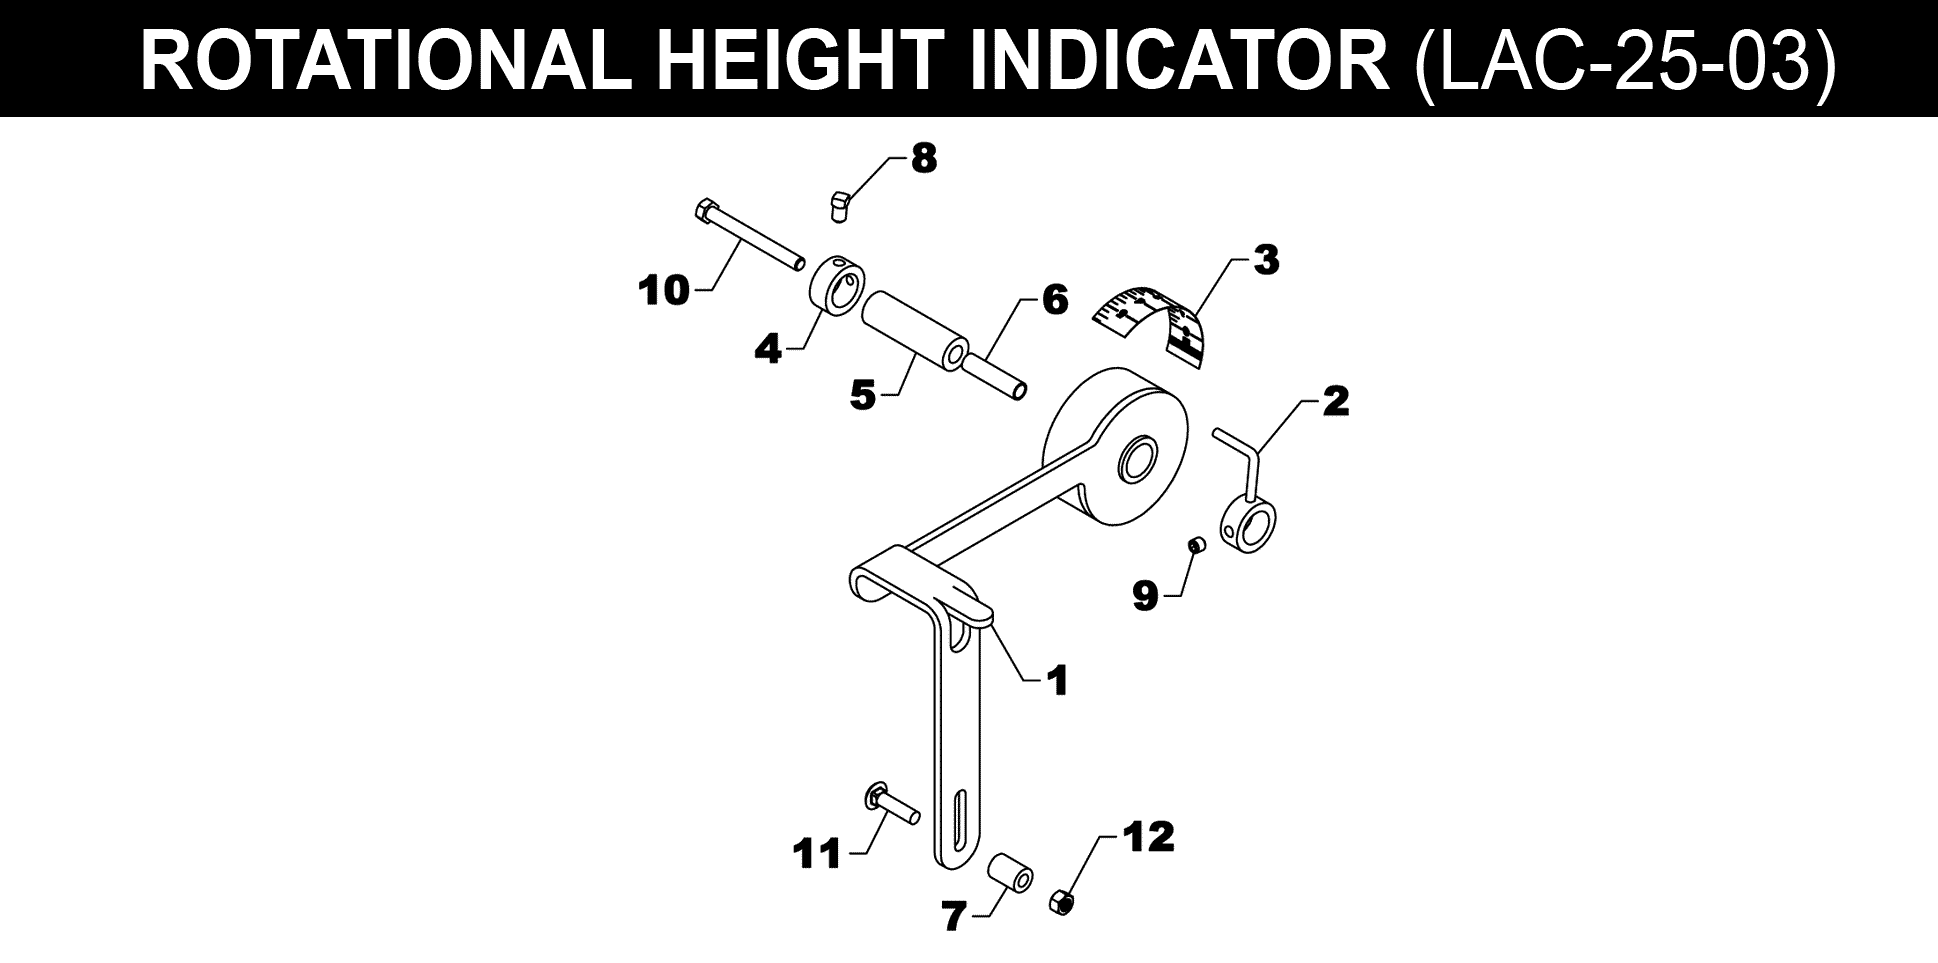 Height Indicator - LAC-25-03